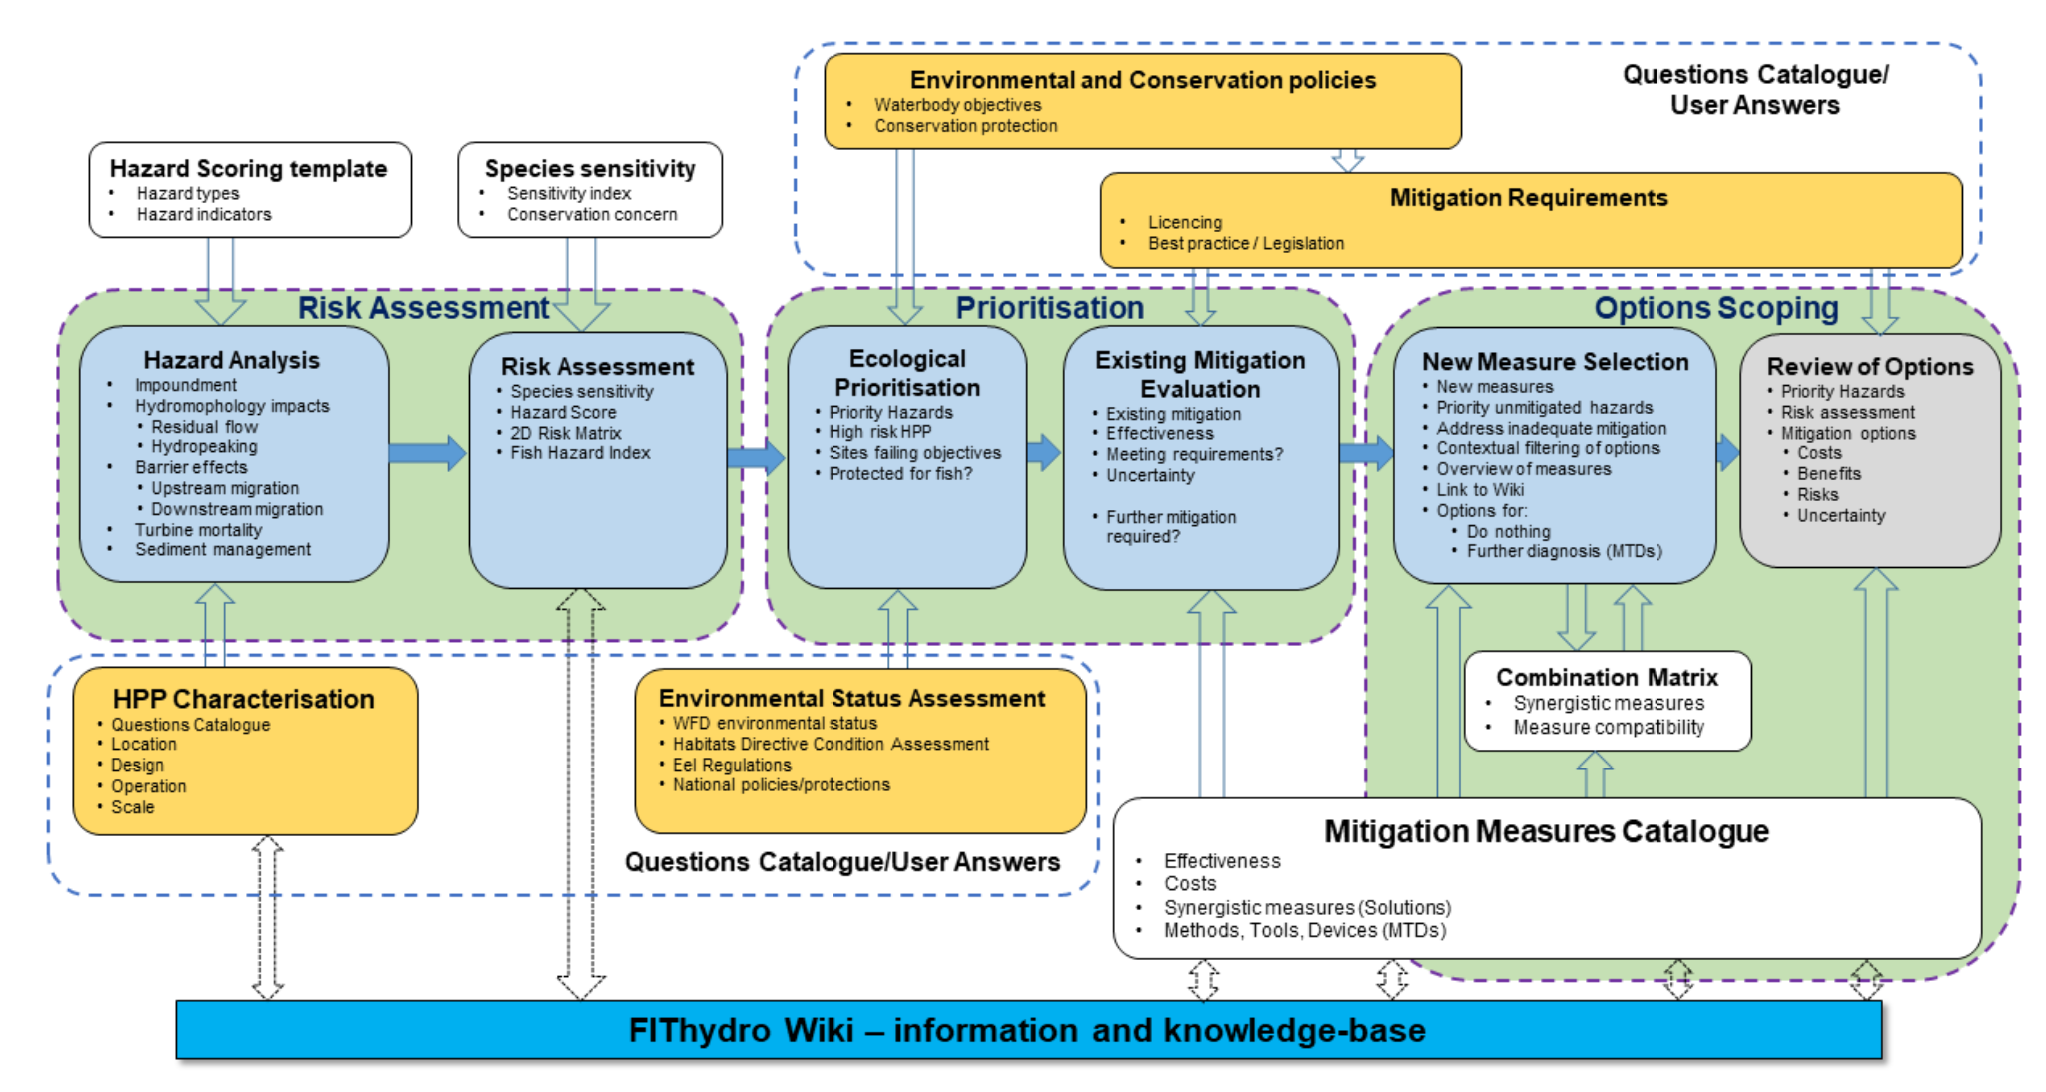 Conceptual workflow diagram of the Decision Support System web-tool – highlighting key steps (green), tasks/processes (blue), user inputs (yellow), system inputs/knowledge (white) and outputs (grey) – key questions and concepts are noted for each step.